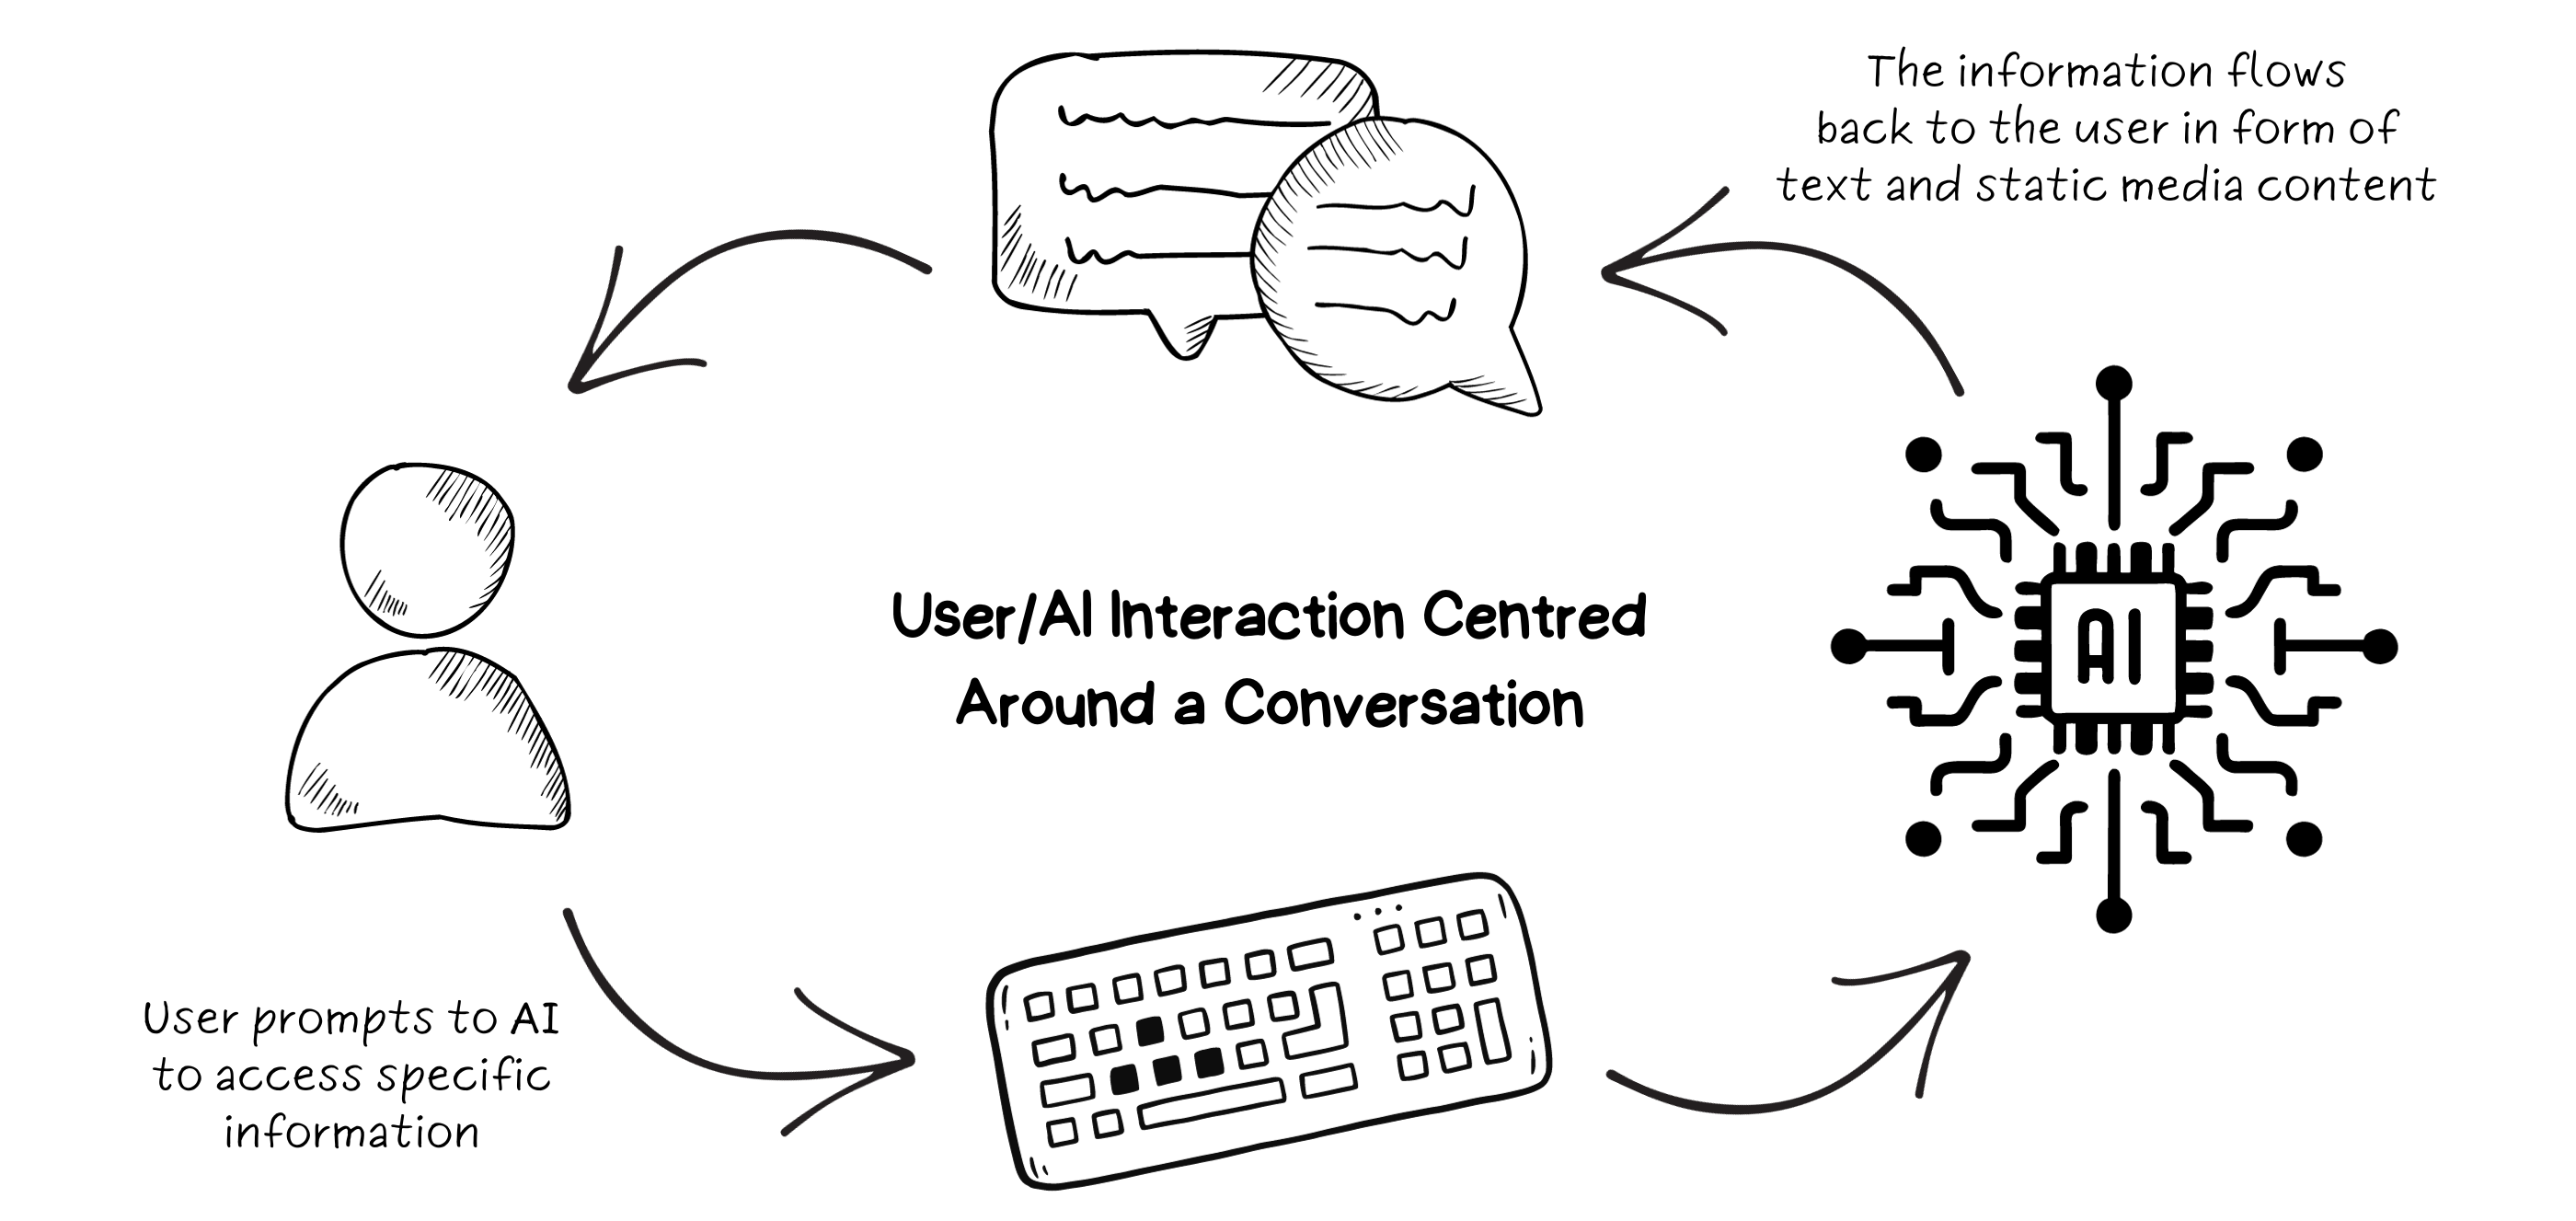 The workflow of a user/AI conversational interaction